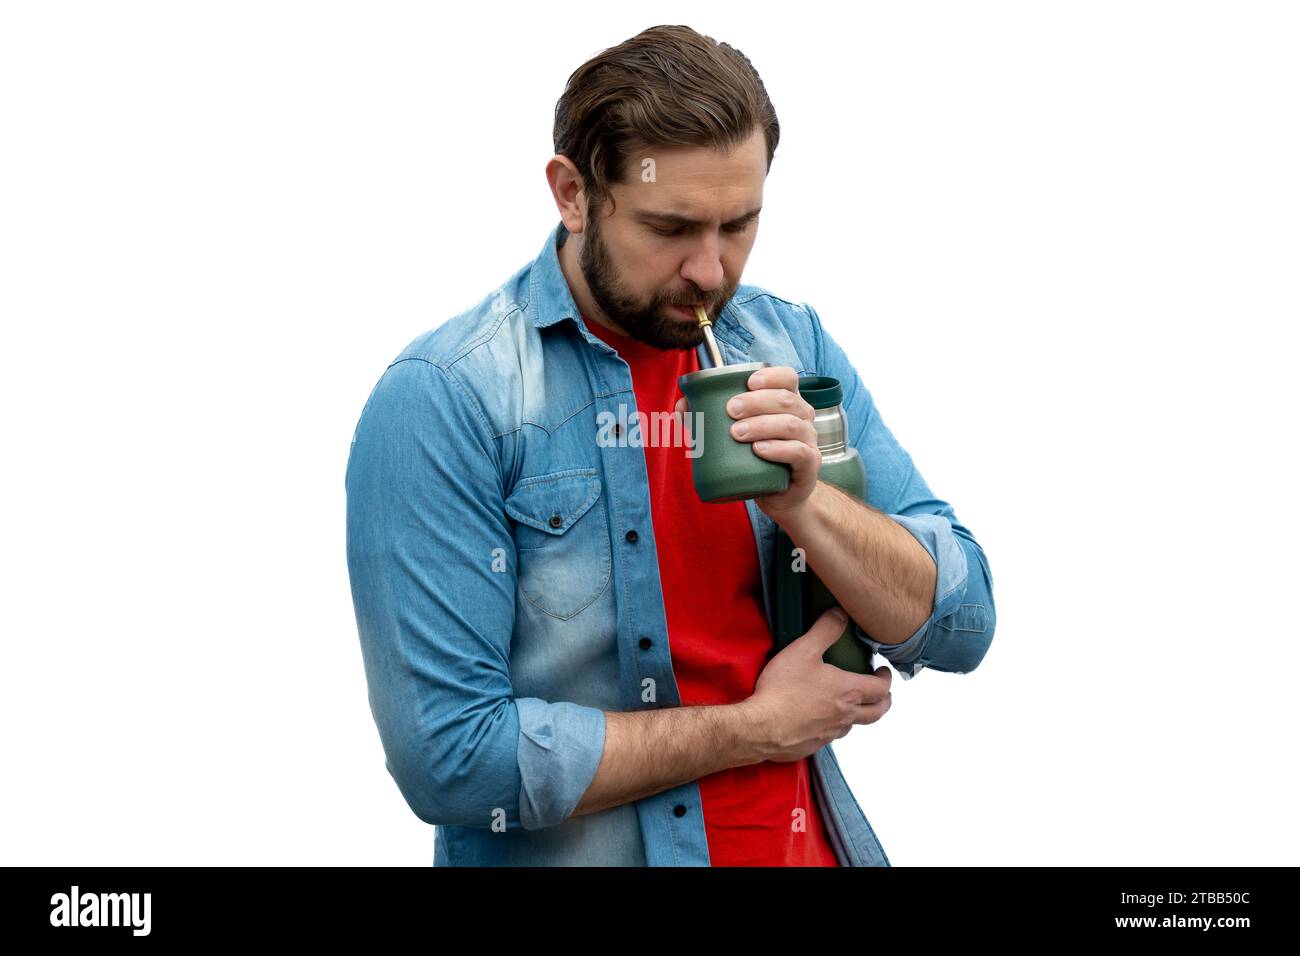 Casual young man drinking mates very seriously. Stock Photo